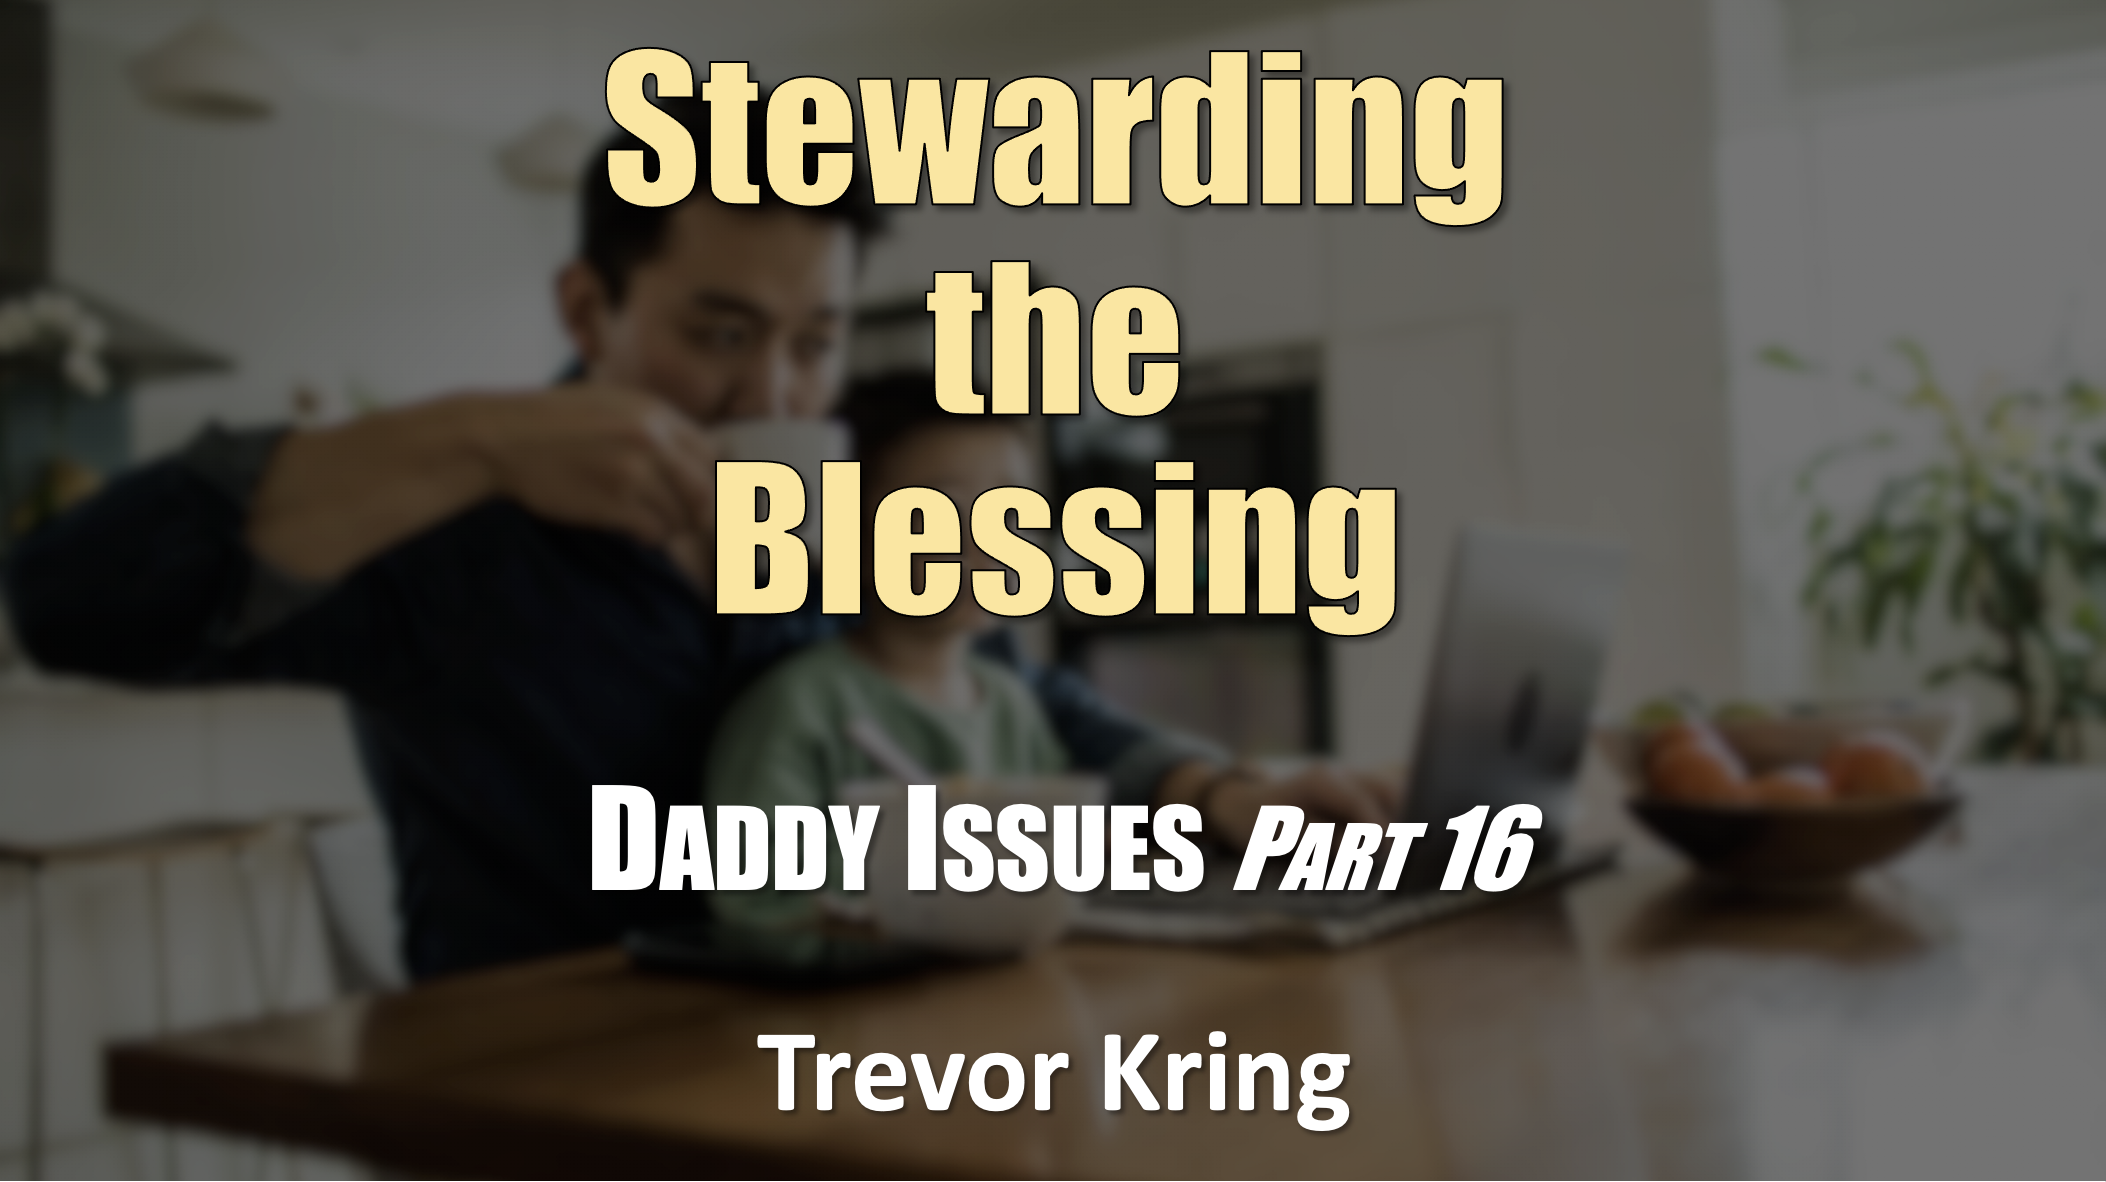 Daddy Issues - Part 16 Stewarding the Blessing